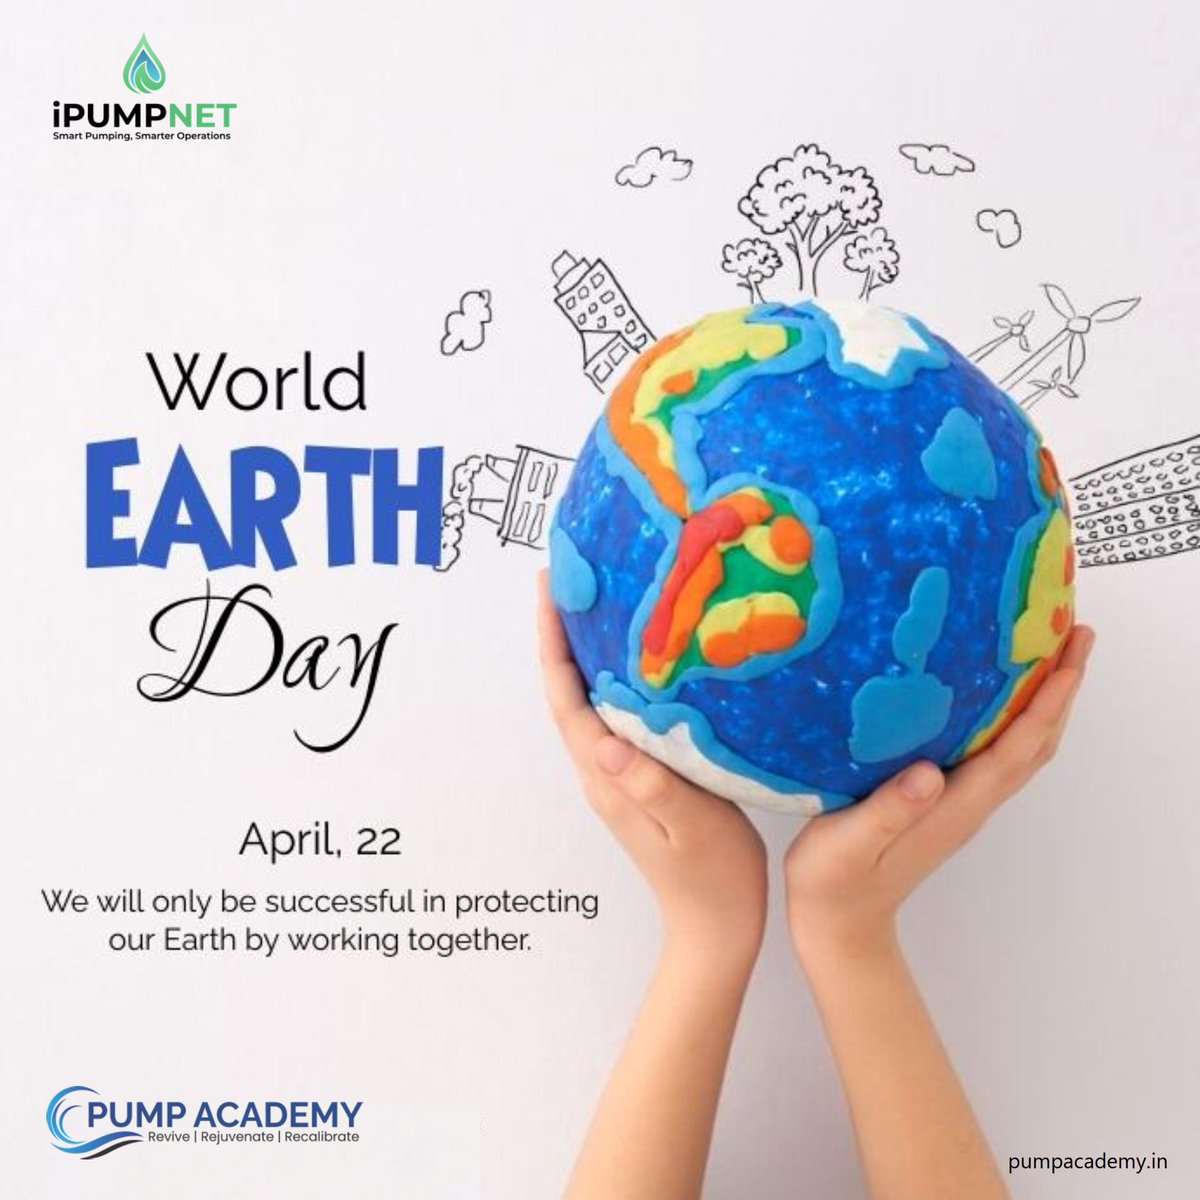 @PumpAcademy wishes on Earth Day: We help preserve planet by energy efficiency and reducing carbon emissions with advanced pump optimization solution, #iPUMPNET. #earthday #happyearthday #earthday2024 #earthday24 #earthdayeveryday #pumpacademy pumpacademy.in/ipumpnet